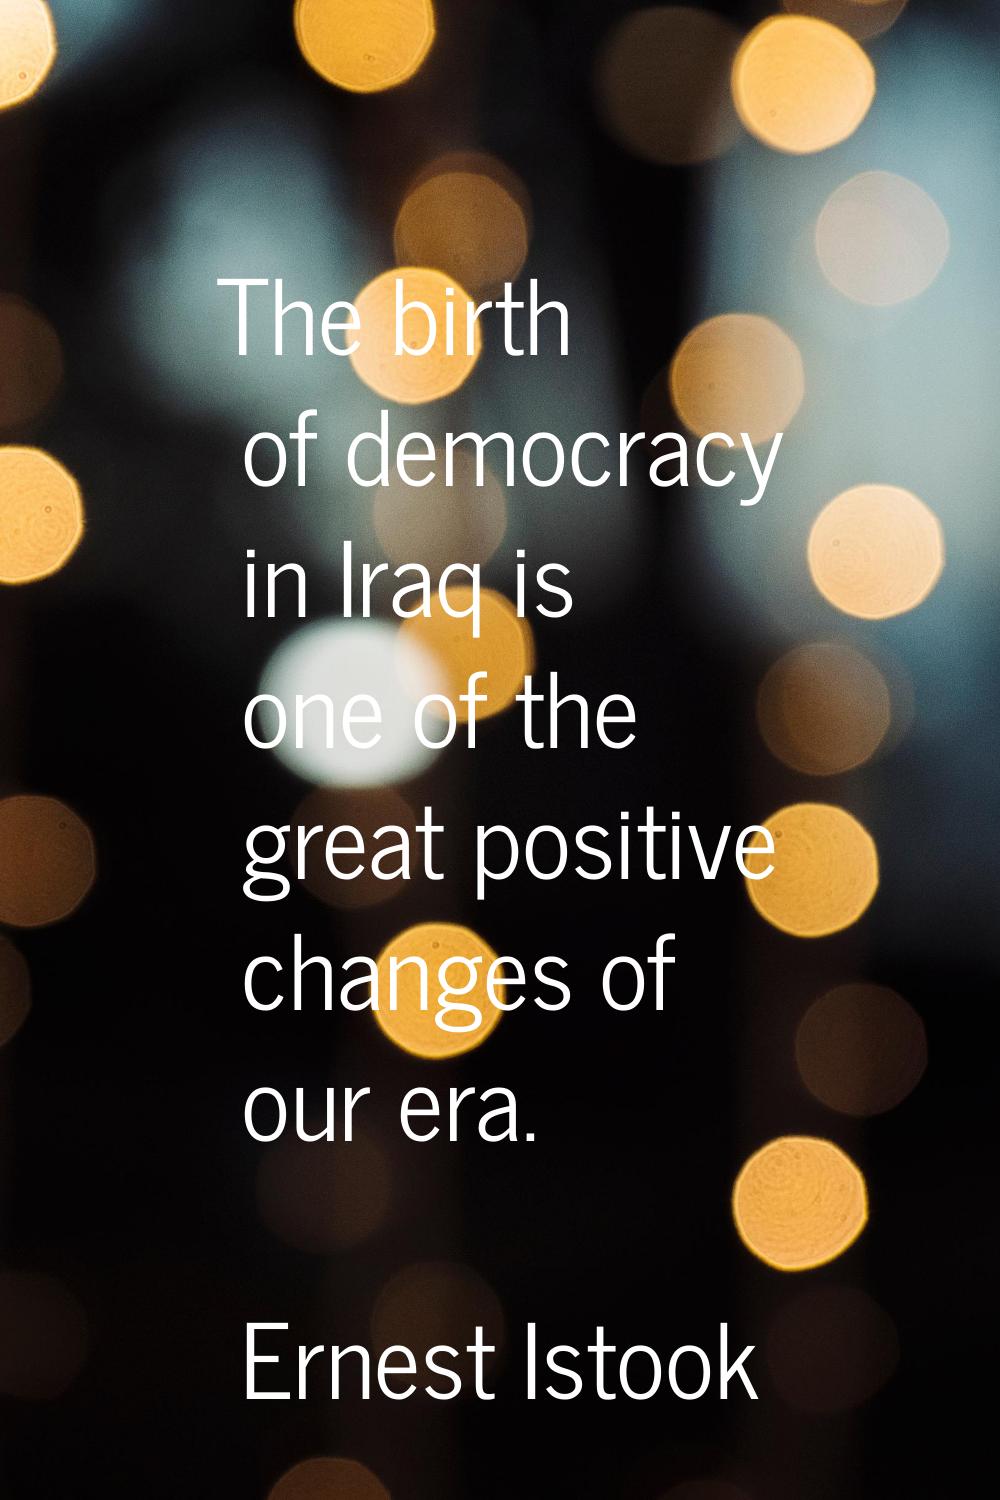 The birth of democracy in Iraq is one of the great positive changes of our era.